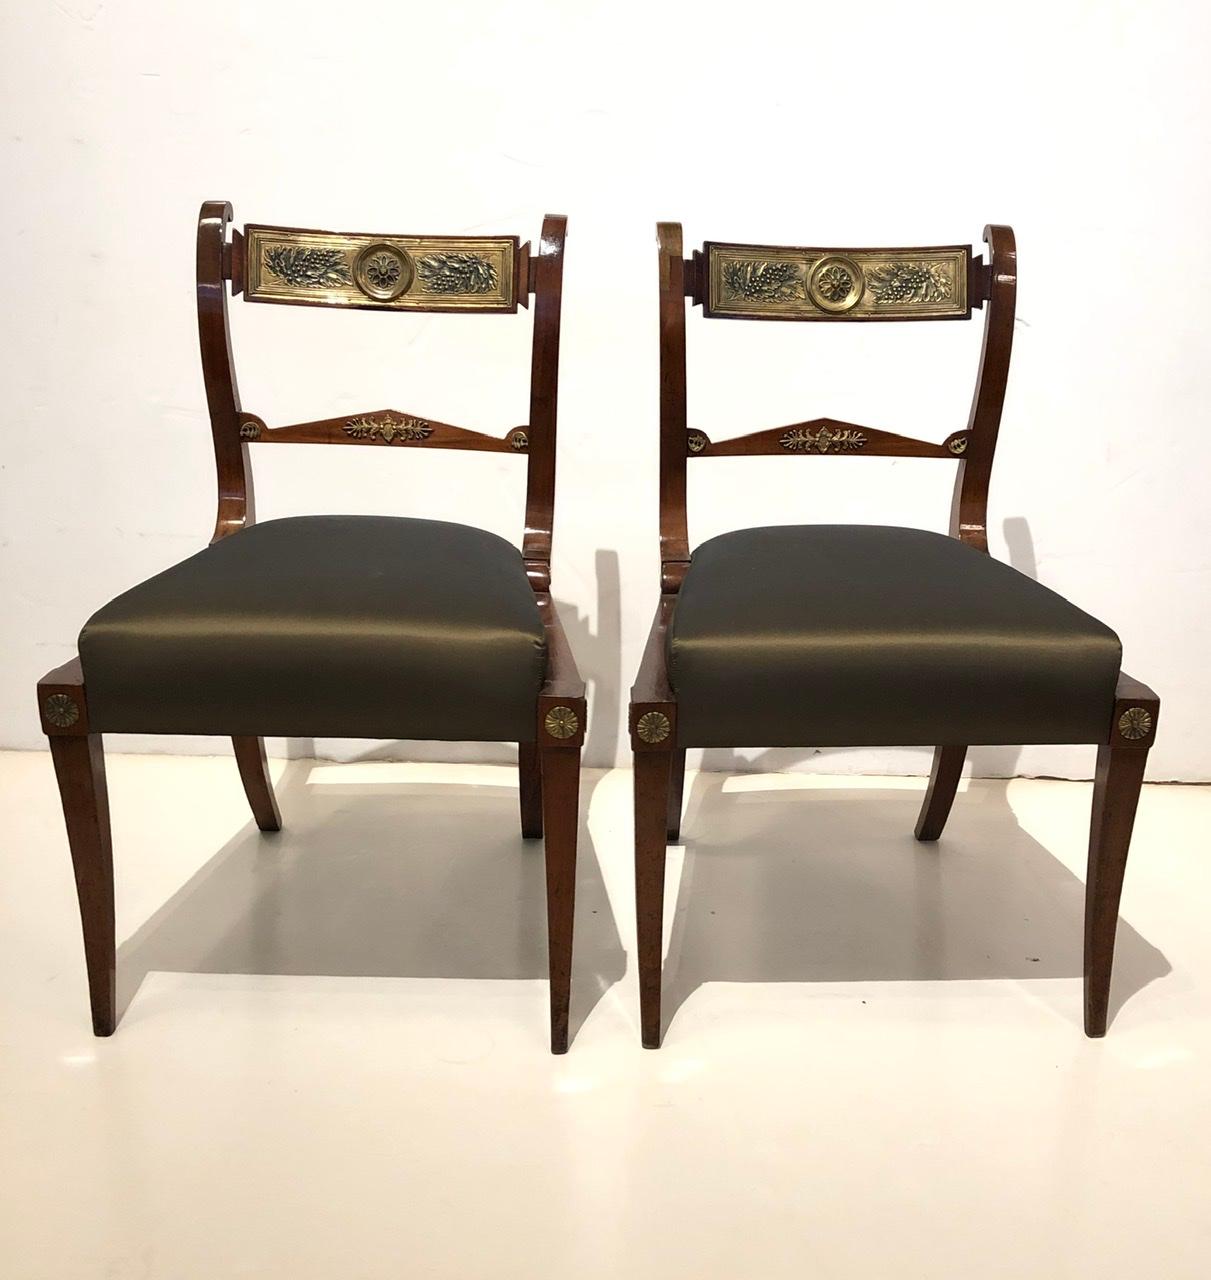 Italian Fine Pair of Neoclassical Side Chairs, 1st Half 19th Century For Sale